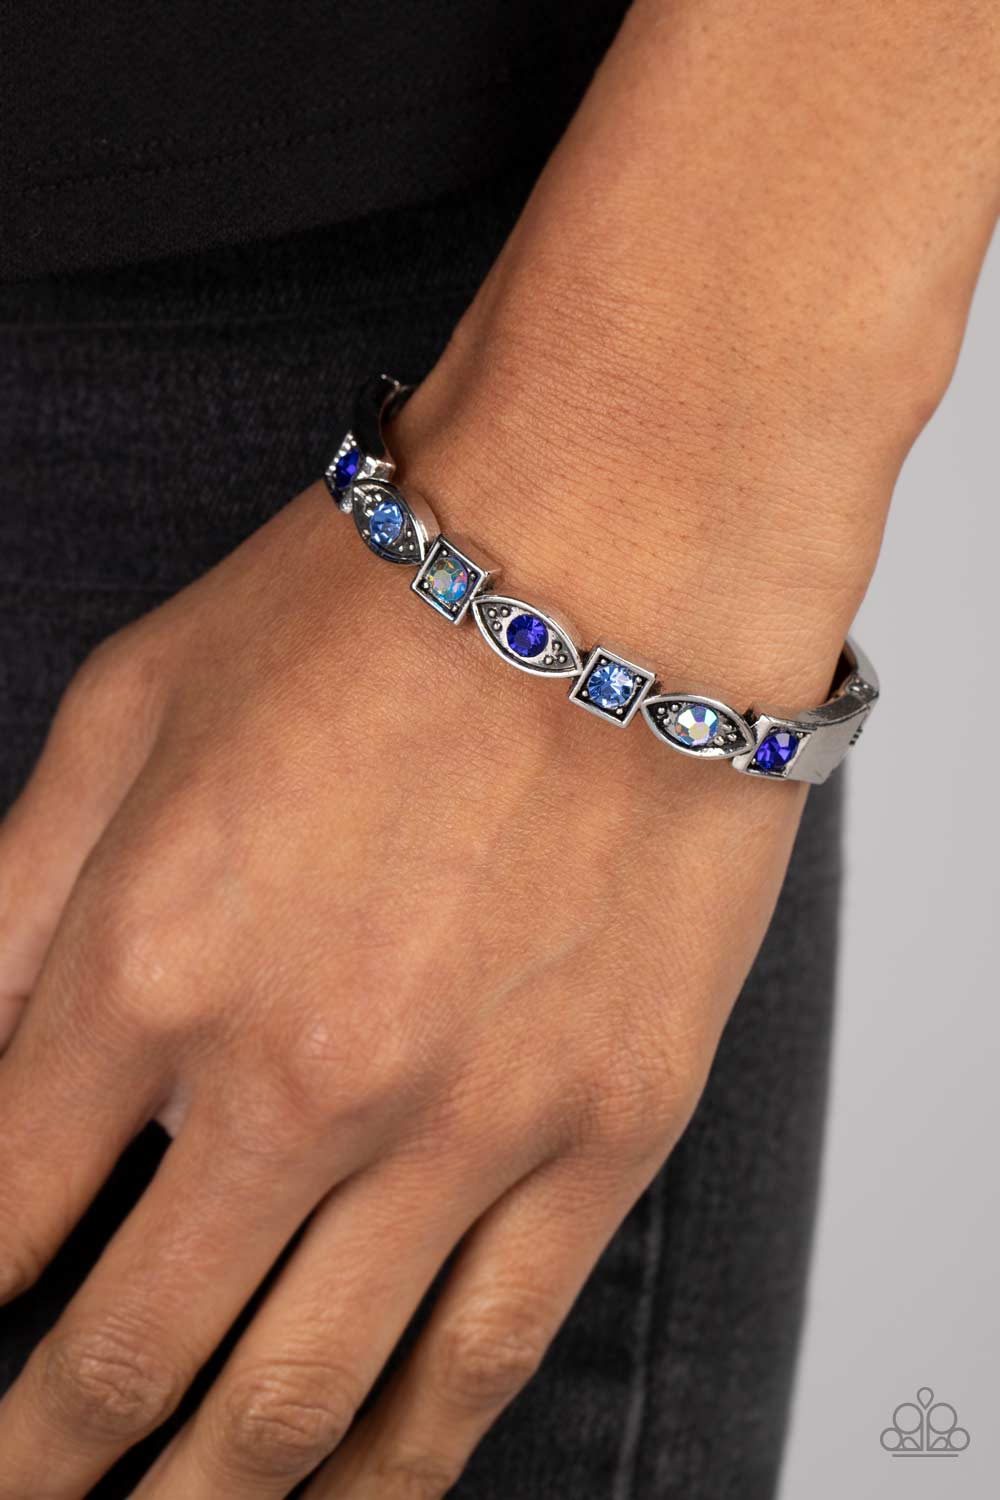 Poetically Picturesque Blue Rhinestone Bracelet - Paparazzi Accessories-on model - CarasShop.com - $5 Jewelry by Cara Jewels